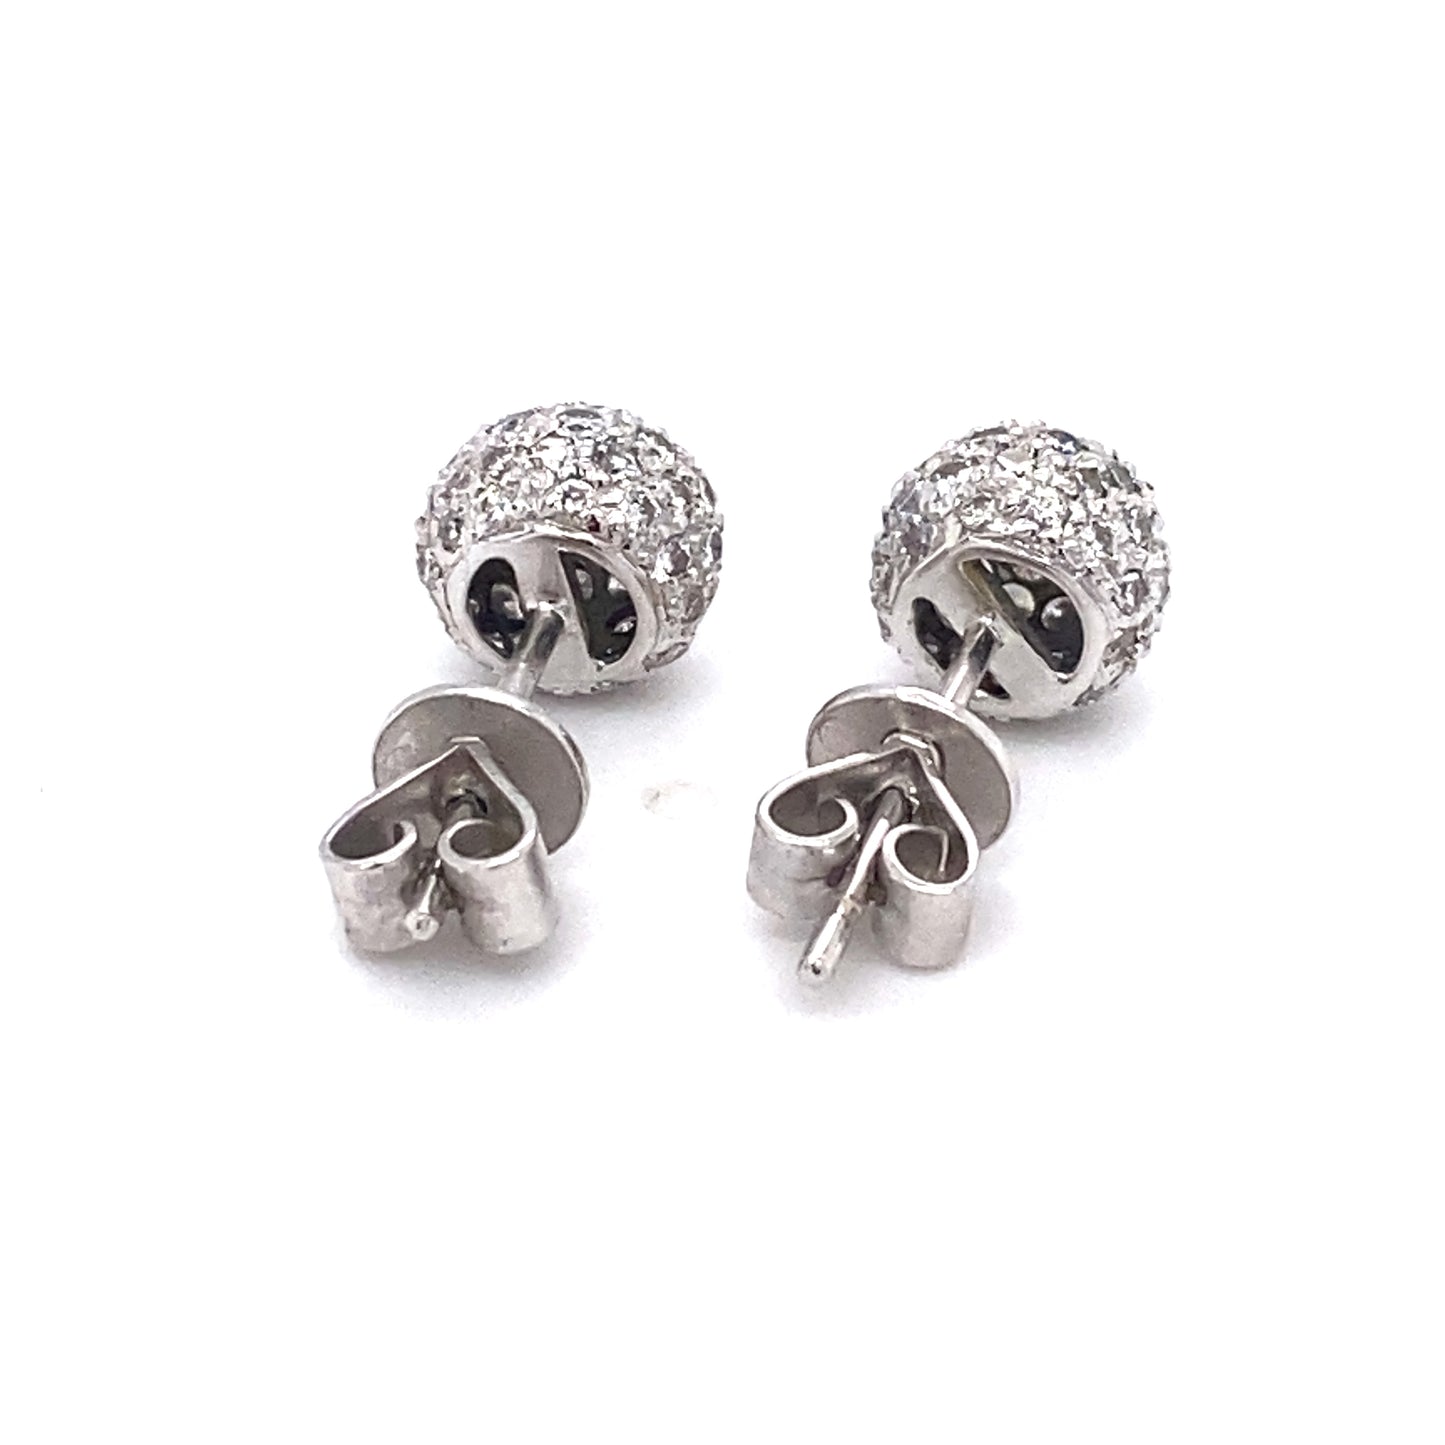 Circa 1960 1.0 CTW Pave Diamond Button Earrings in 18K White Gold